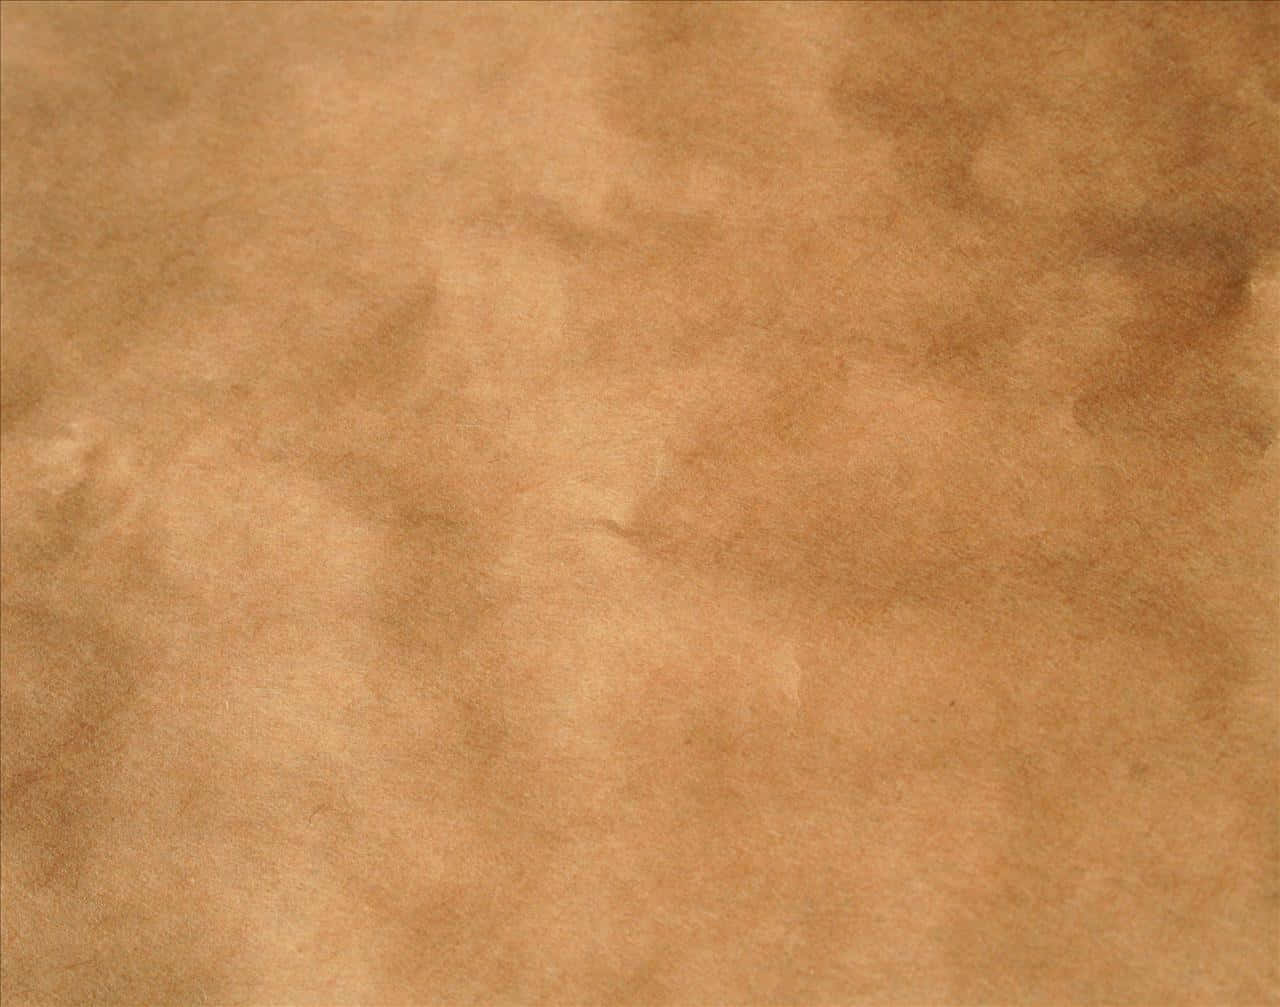 Sophisticated Brown Paper Background